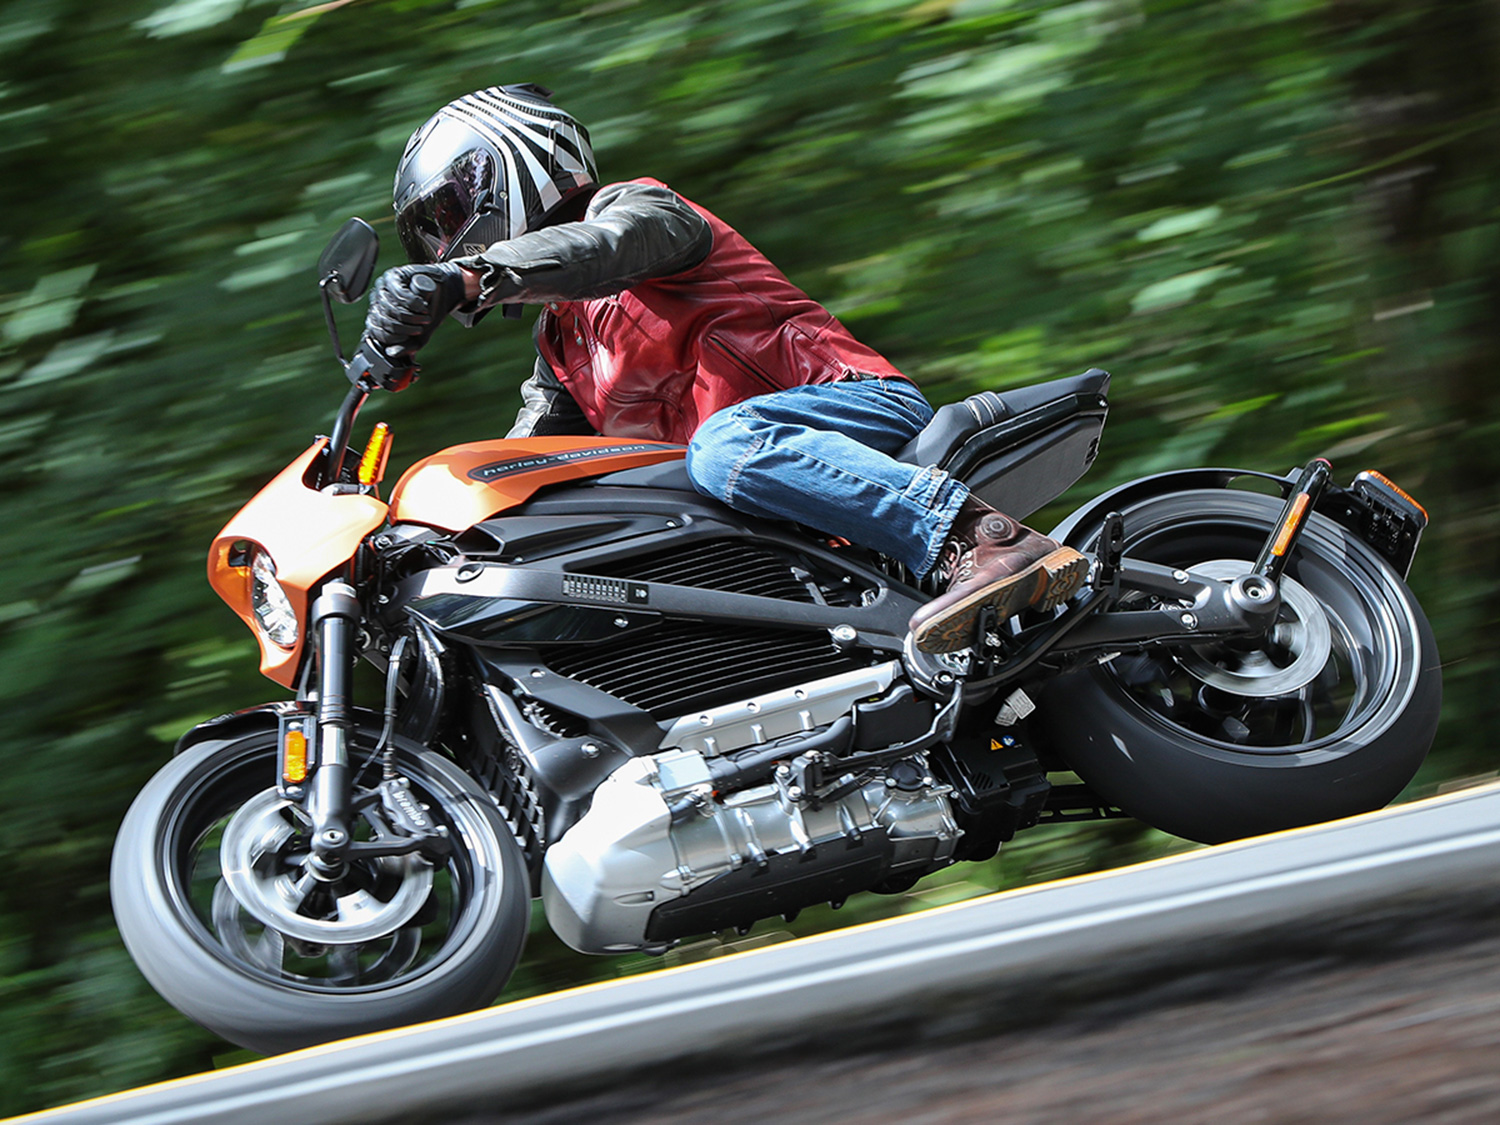 First ride: Harley-Davidson’s new all-electric motorcycle